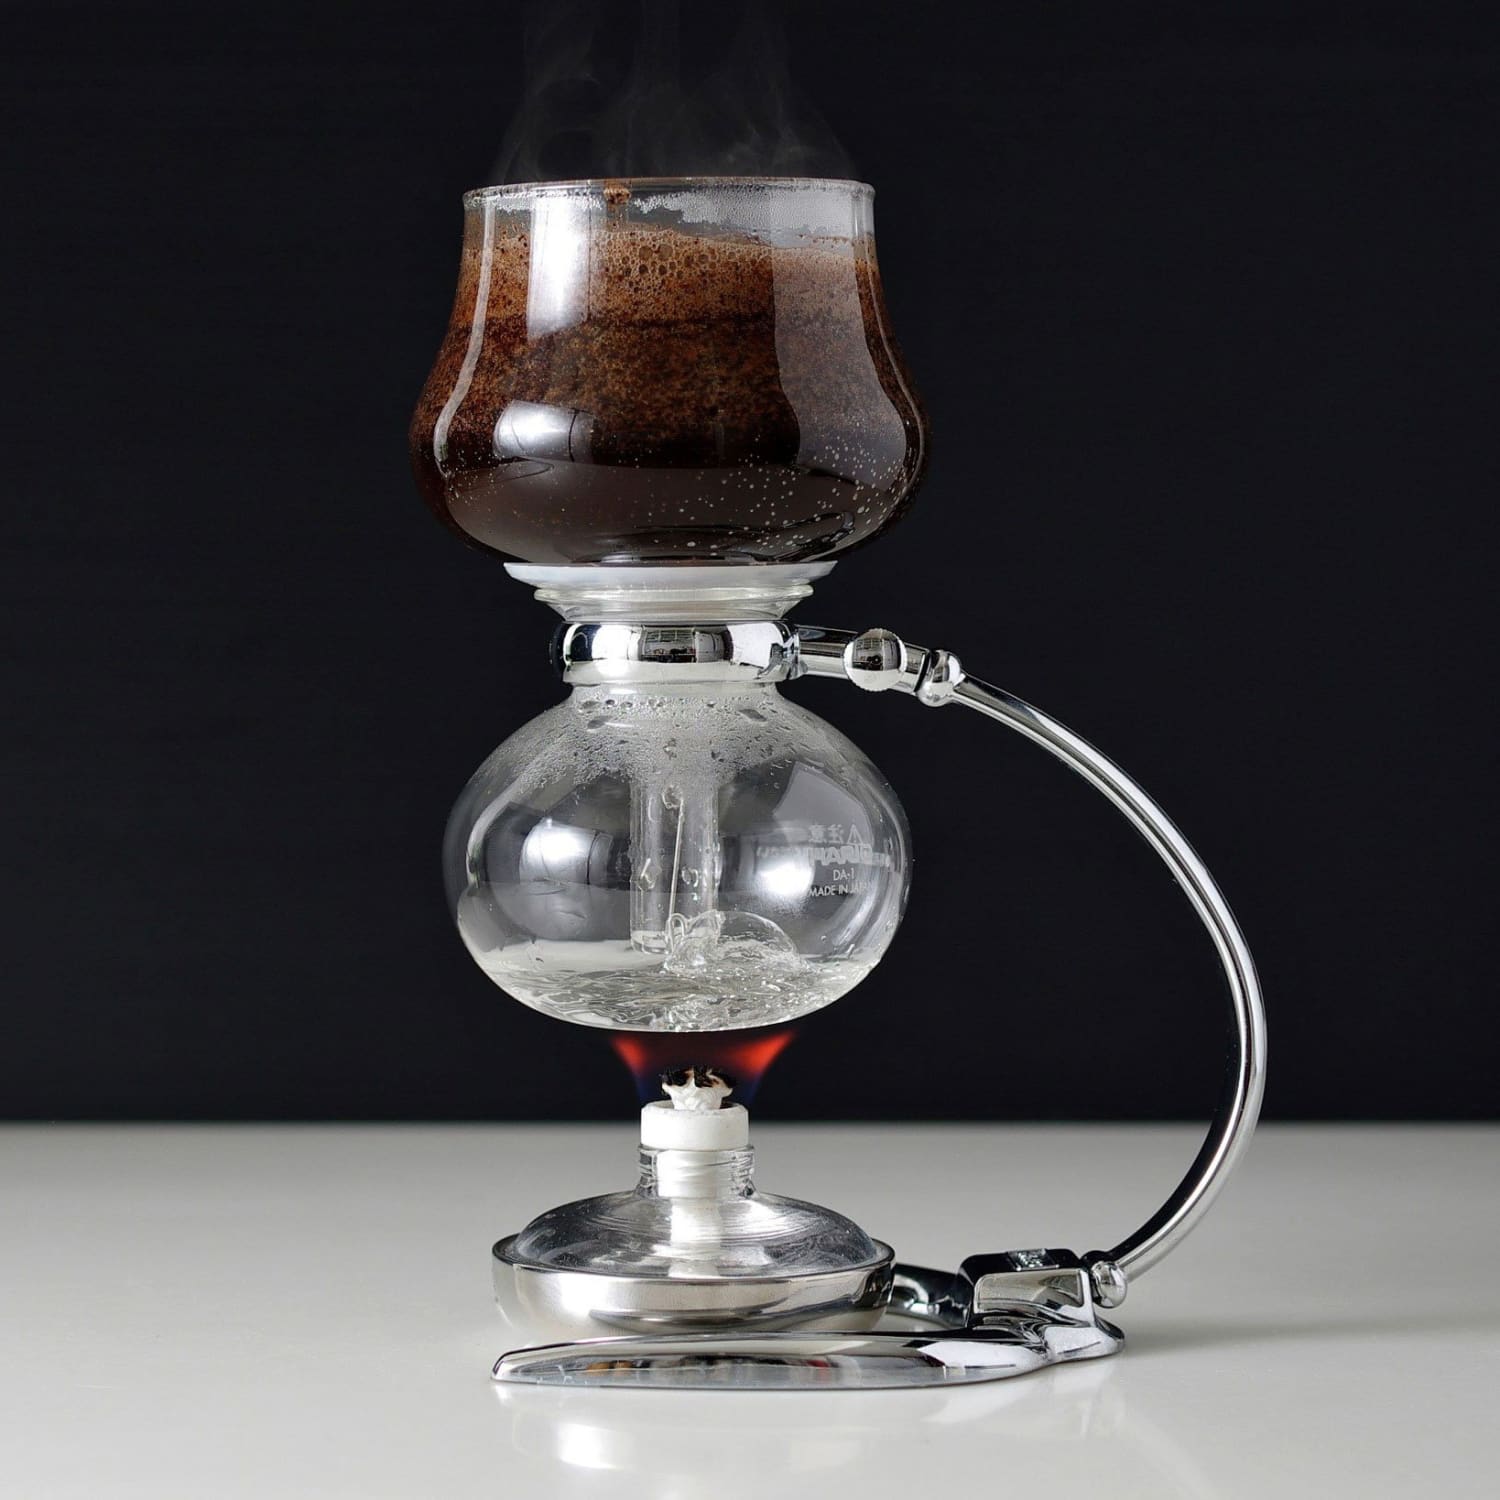 How To Use A Siphon Coffee Maker: Beginners Guide